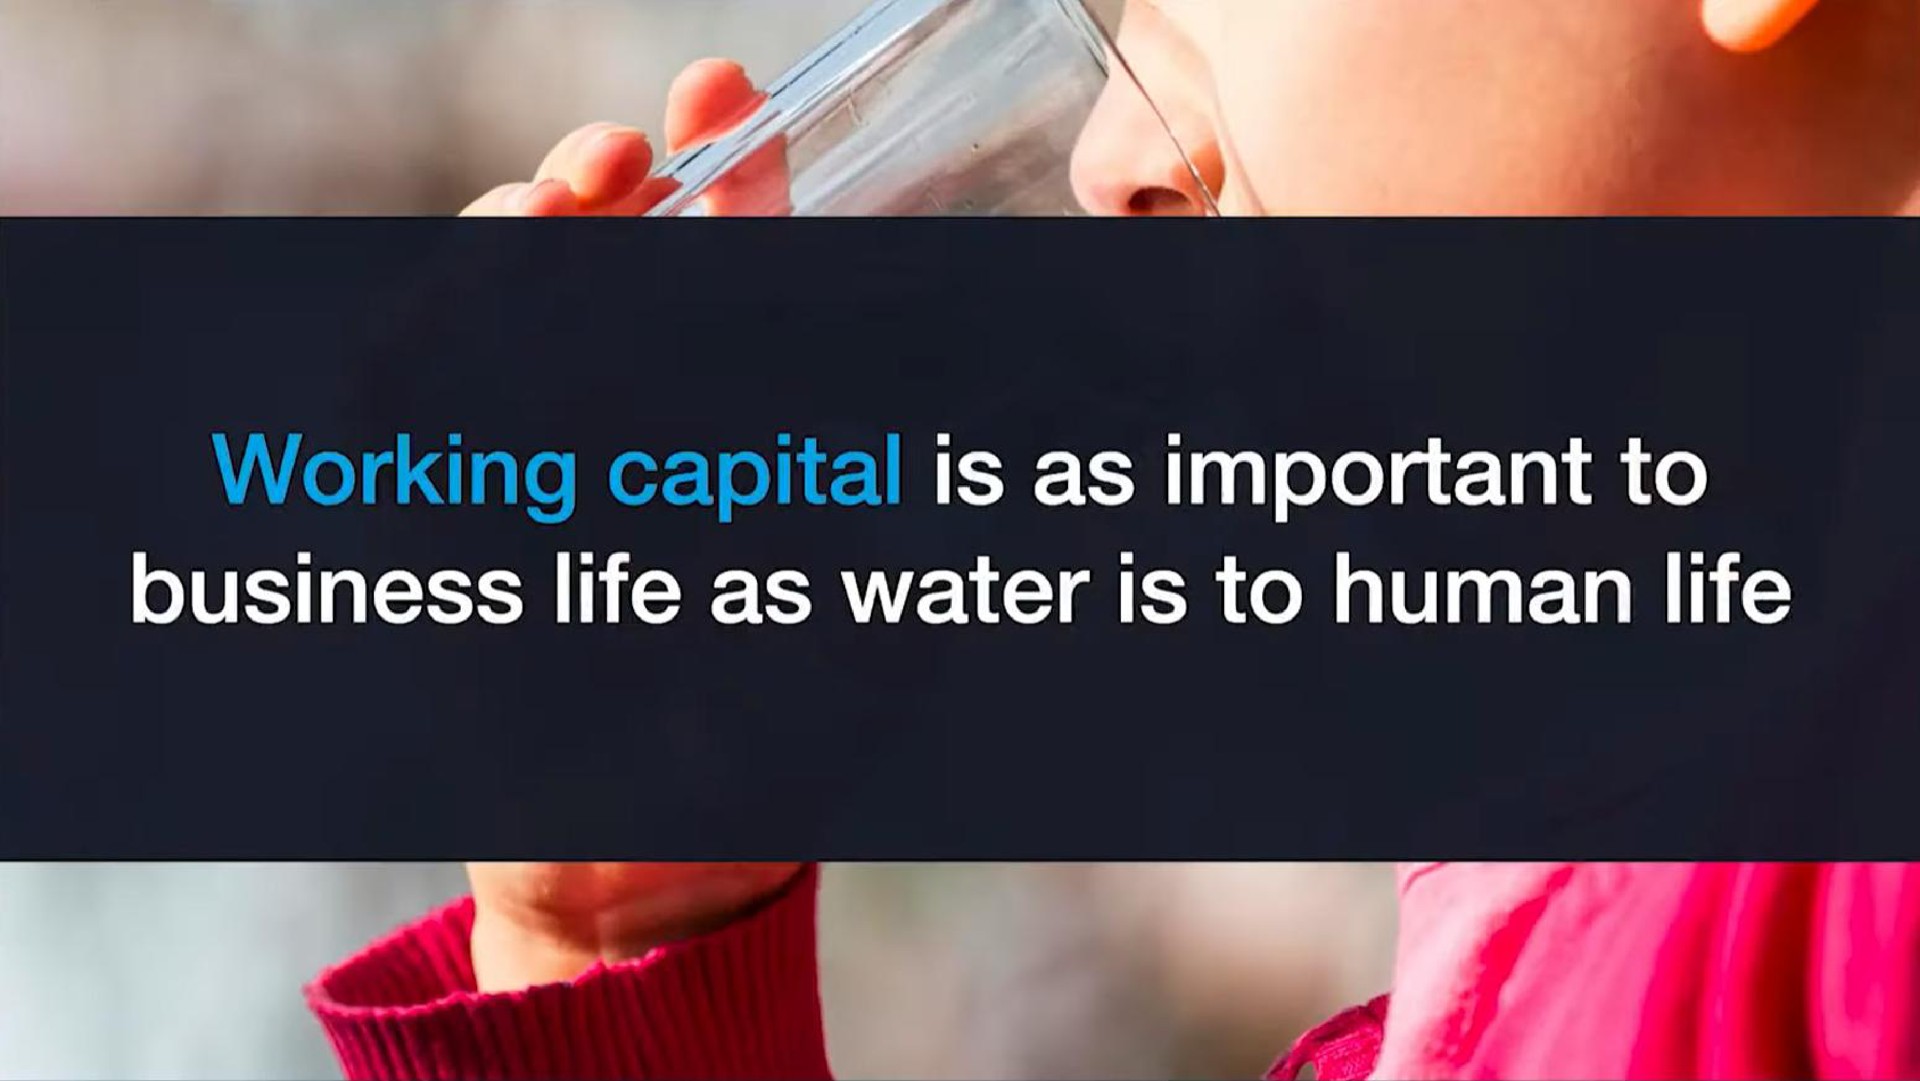 working capital is as important to business life as water is to human life | Bsos